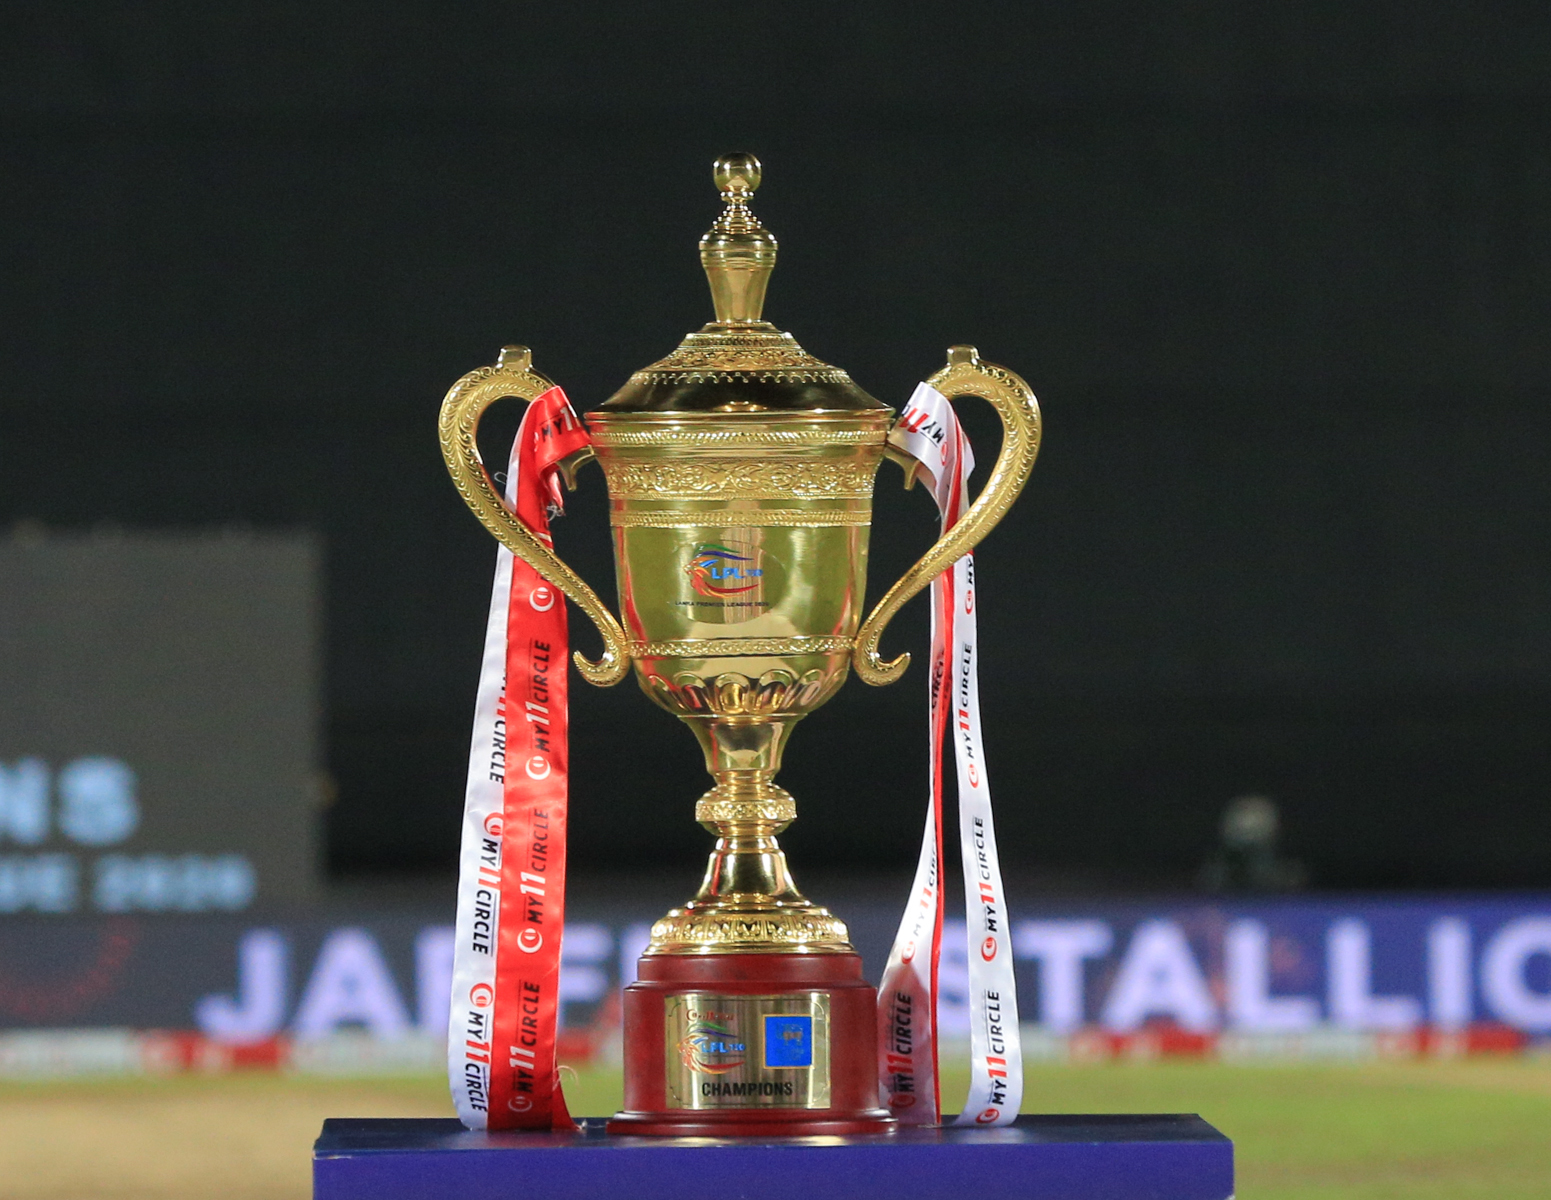 3rd Edition of the Lanka Premier League (LPL) will take place from 31st July to 21st August